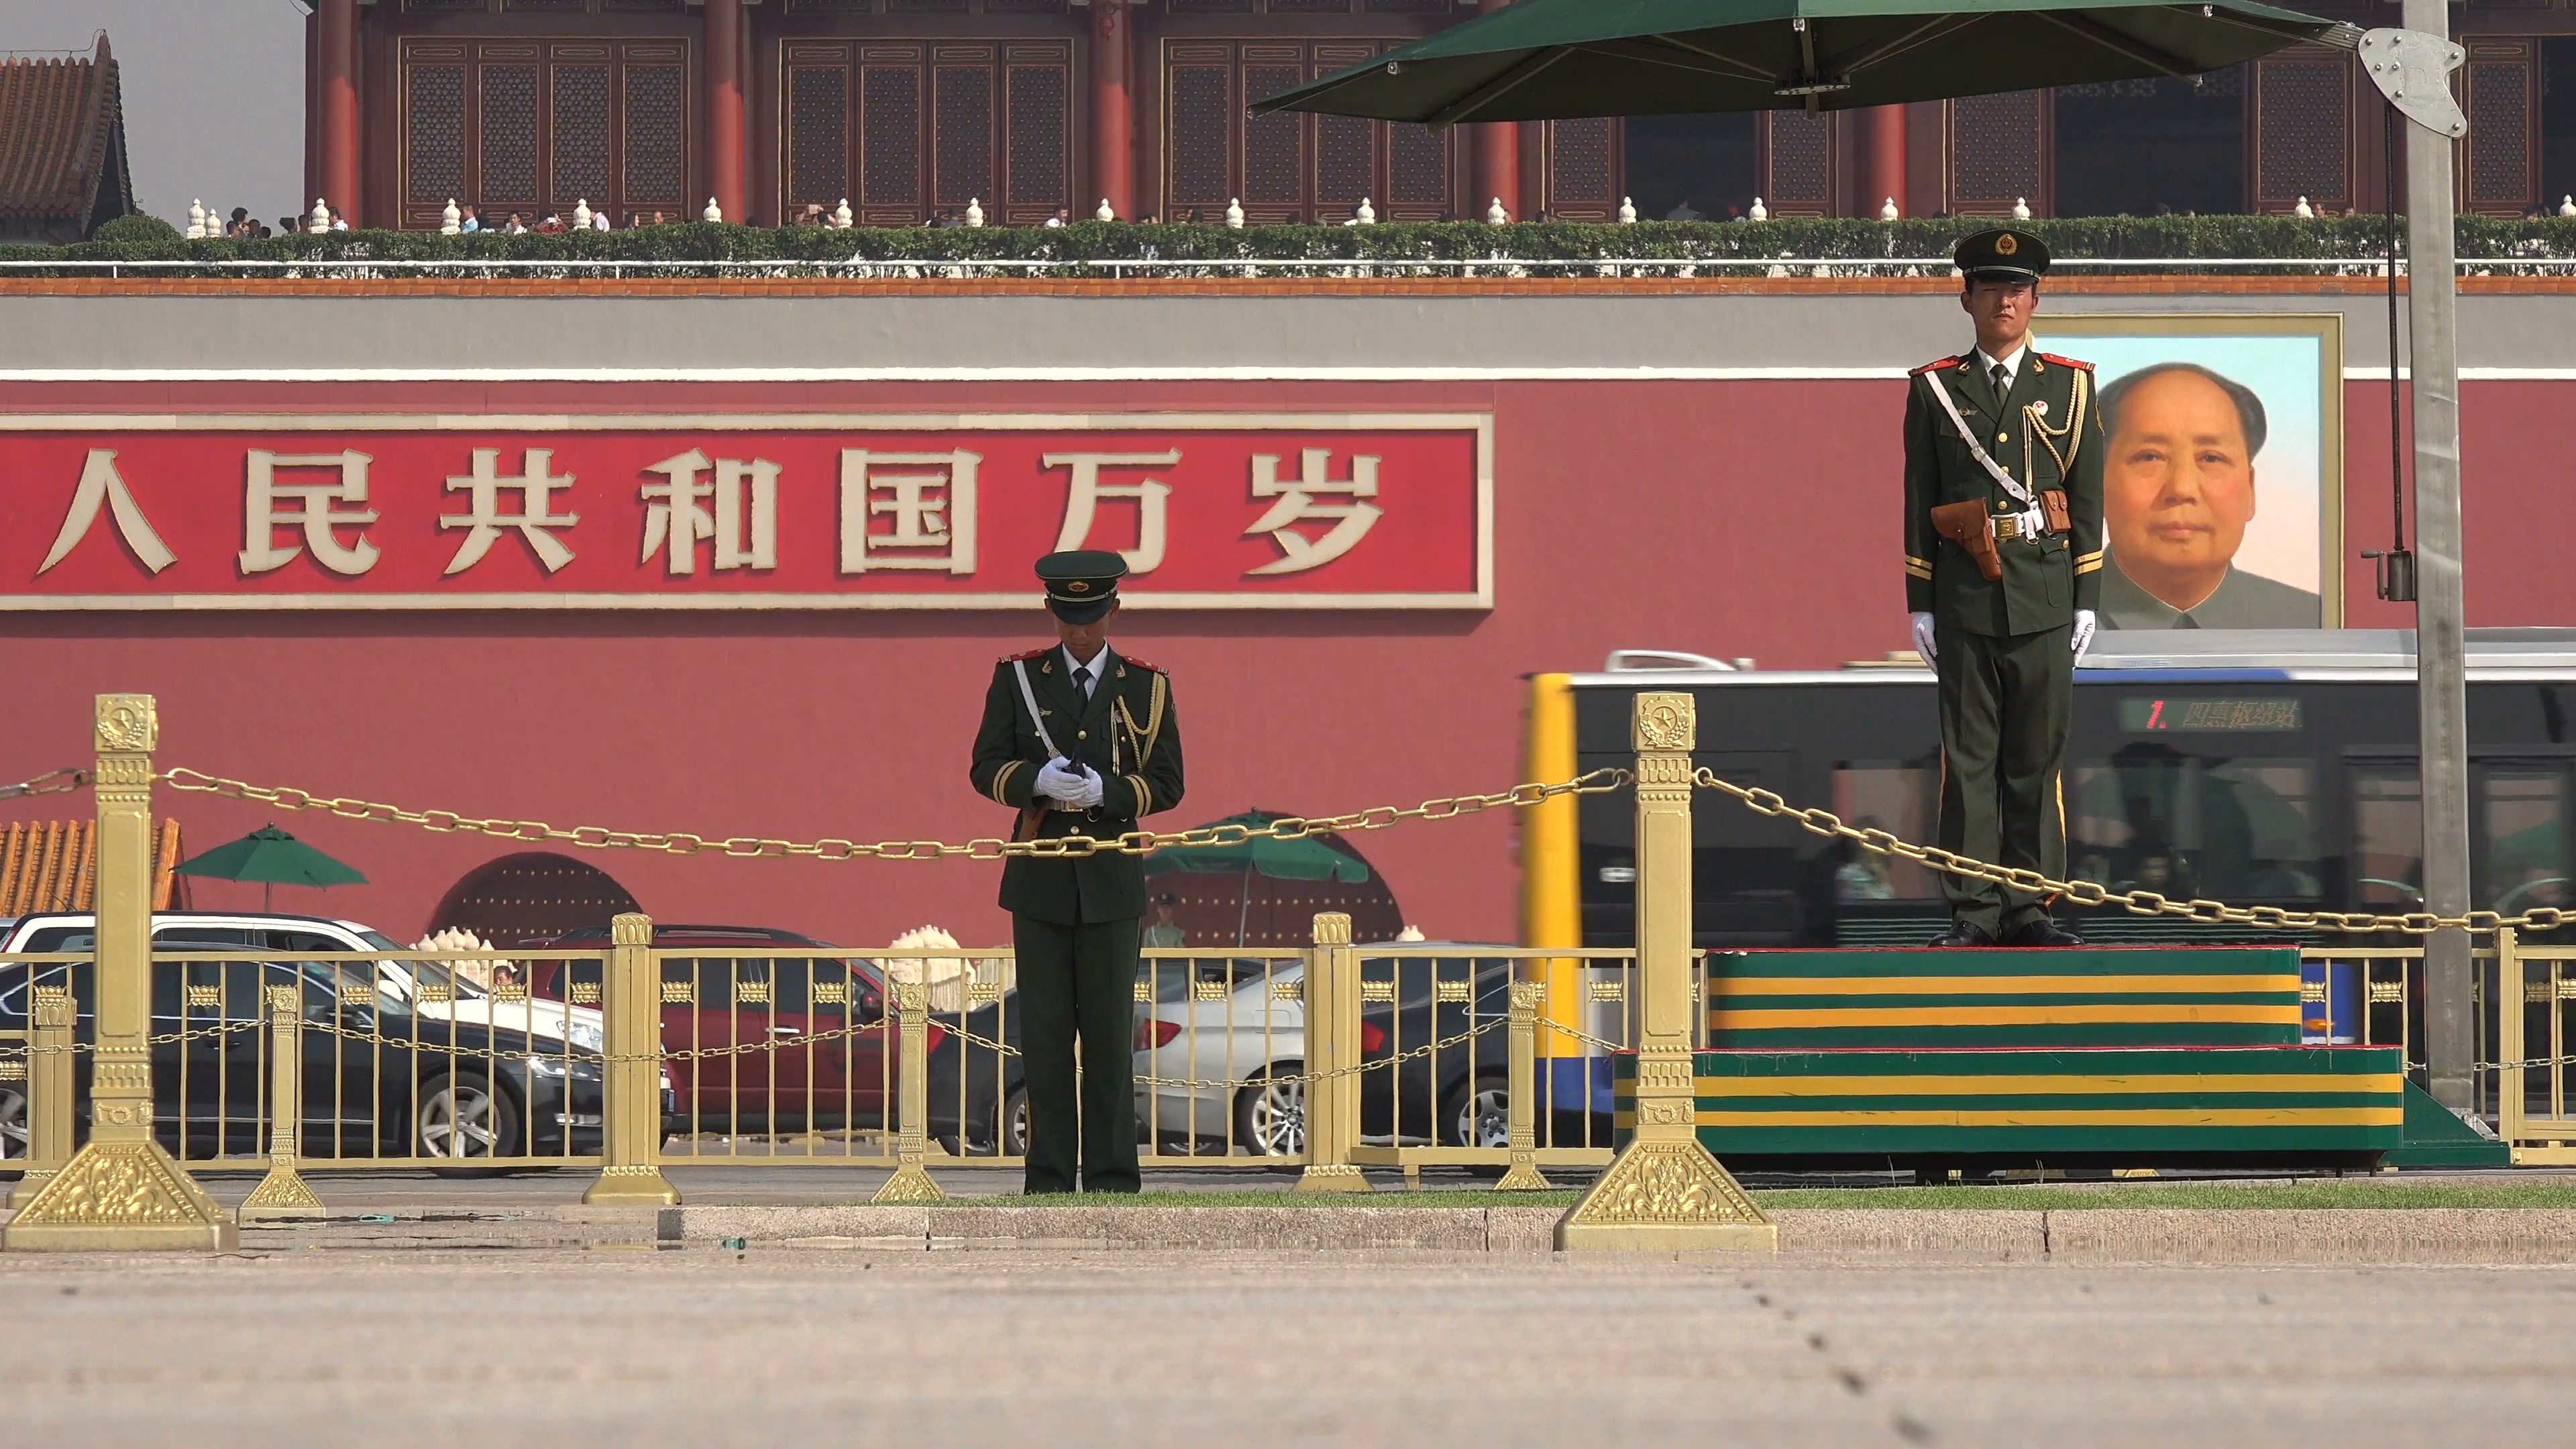 3840x2160 Two soldiers standing guard at Tiananmen Square, Mao Zedong portrait,  Beijing, China